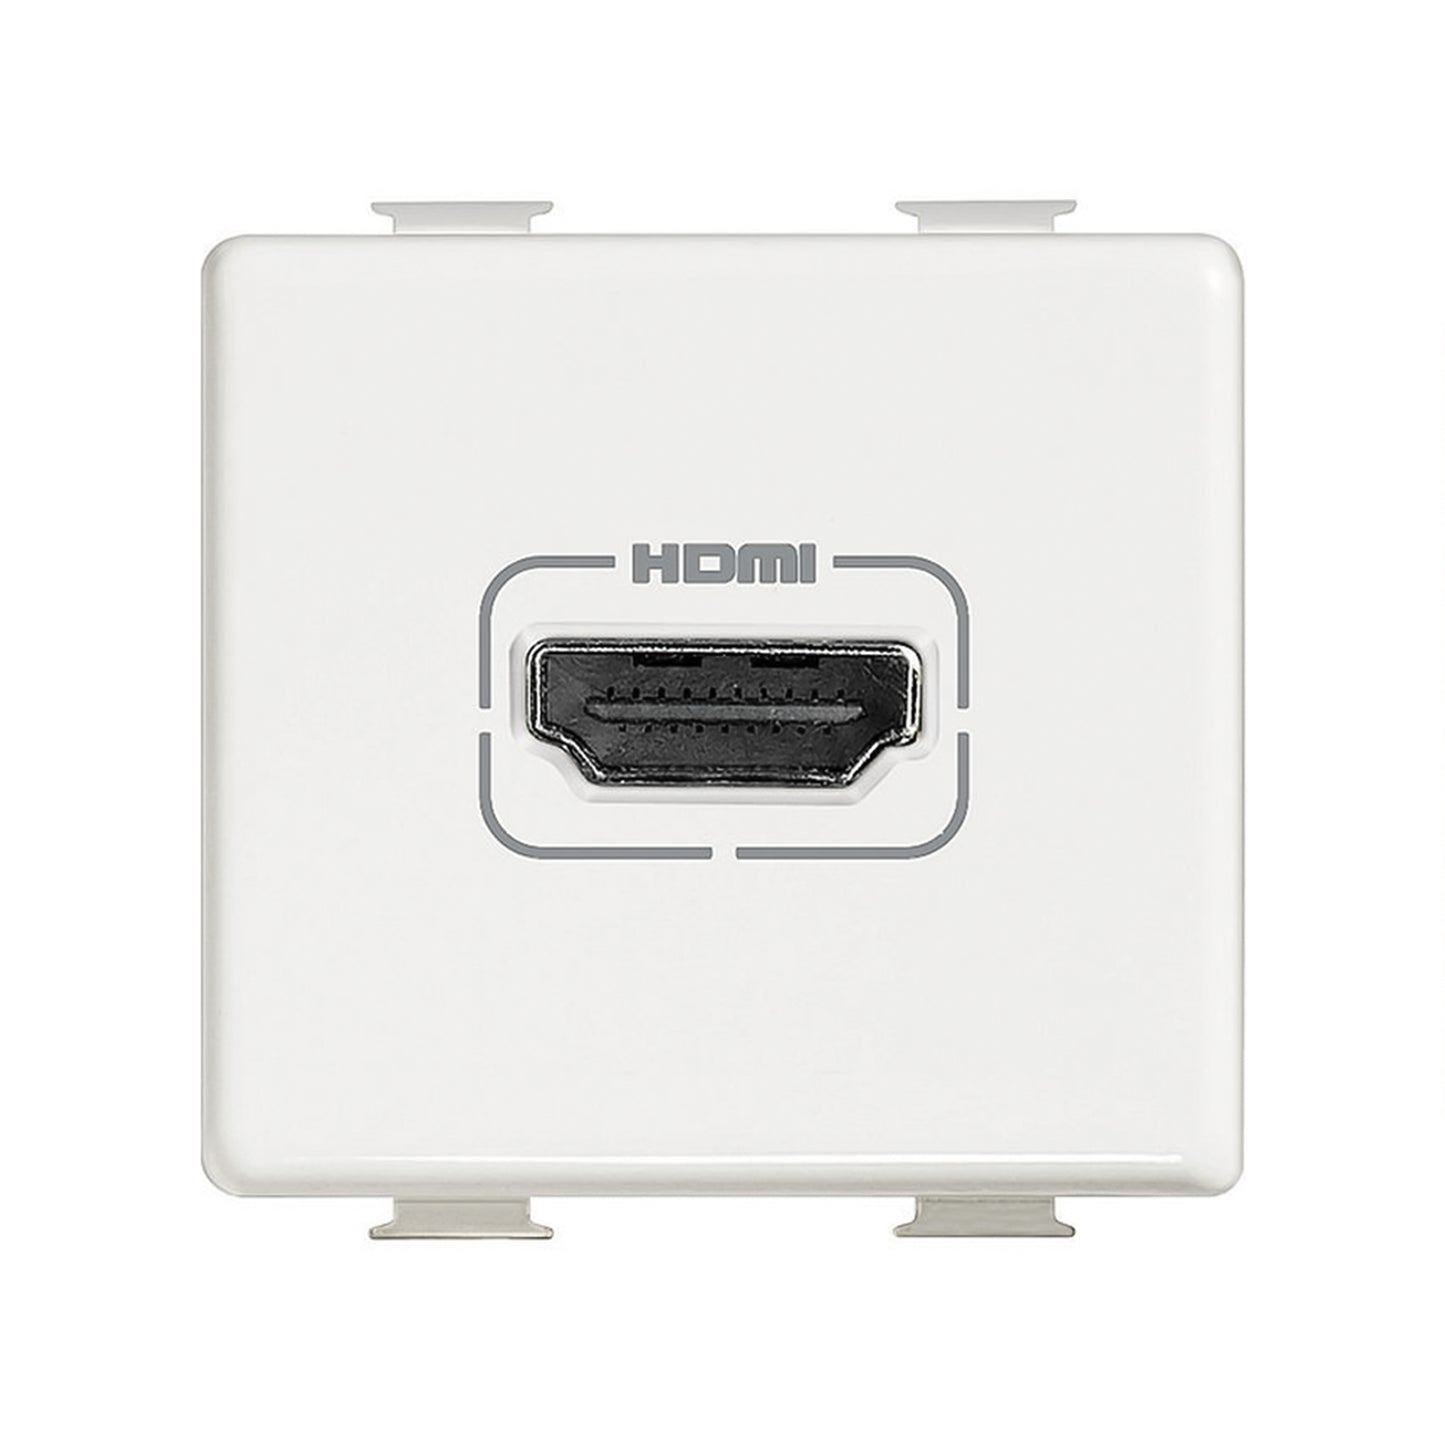 Bticino Matix white HDMI socket, video socket with screw connection, maximum distance between two sockets 5 metres